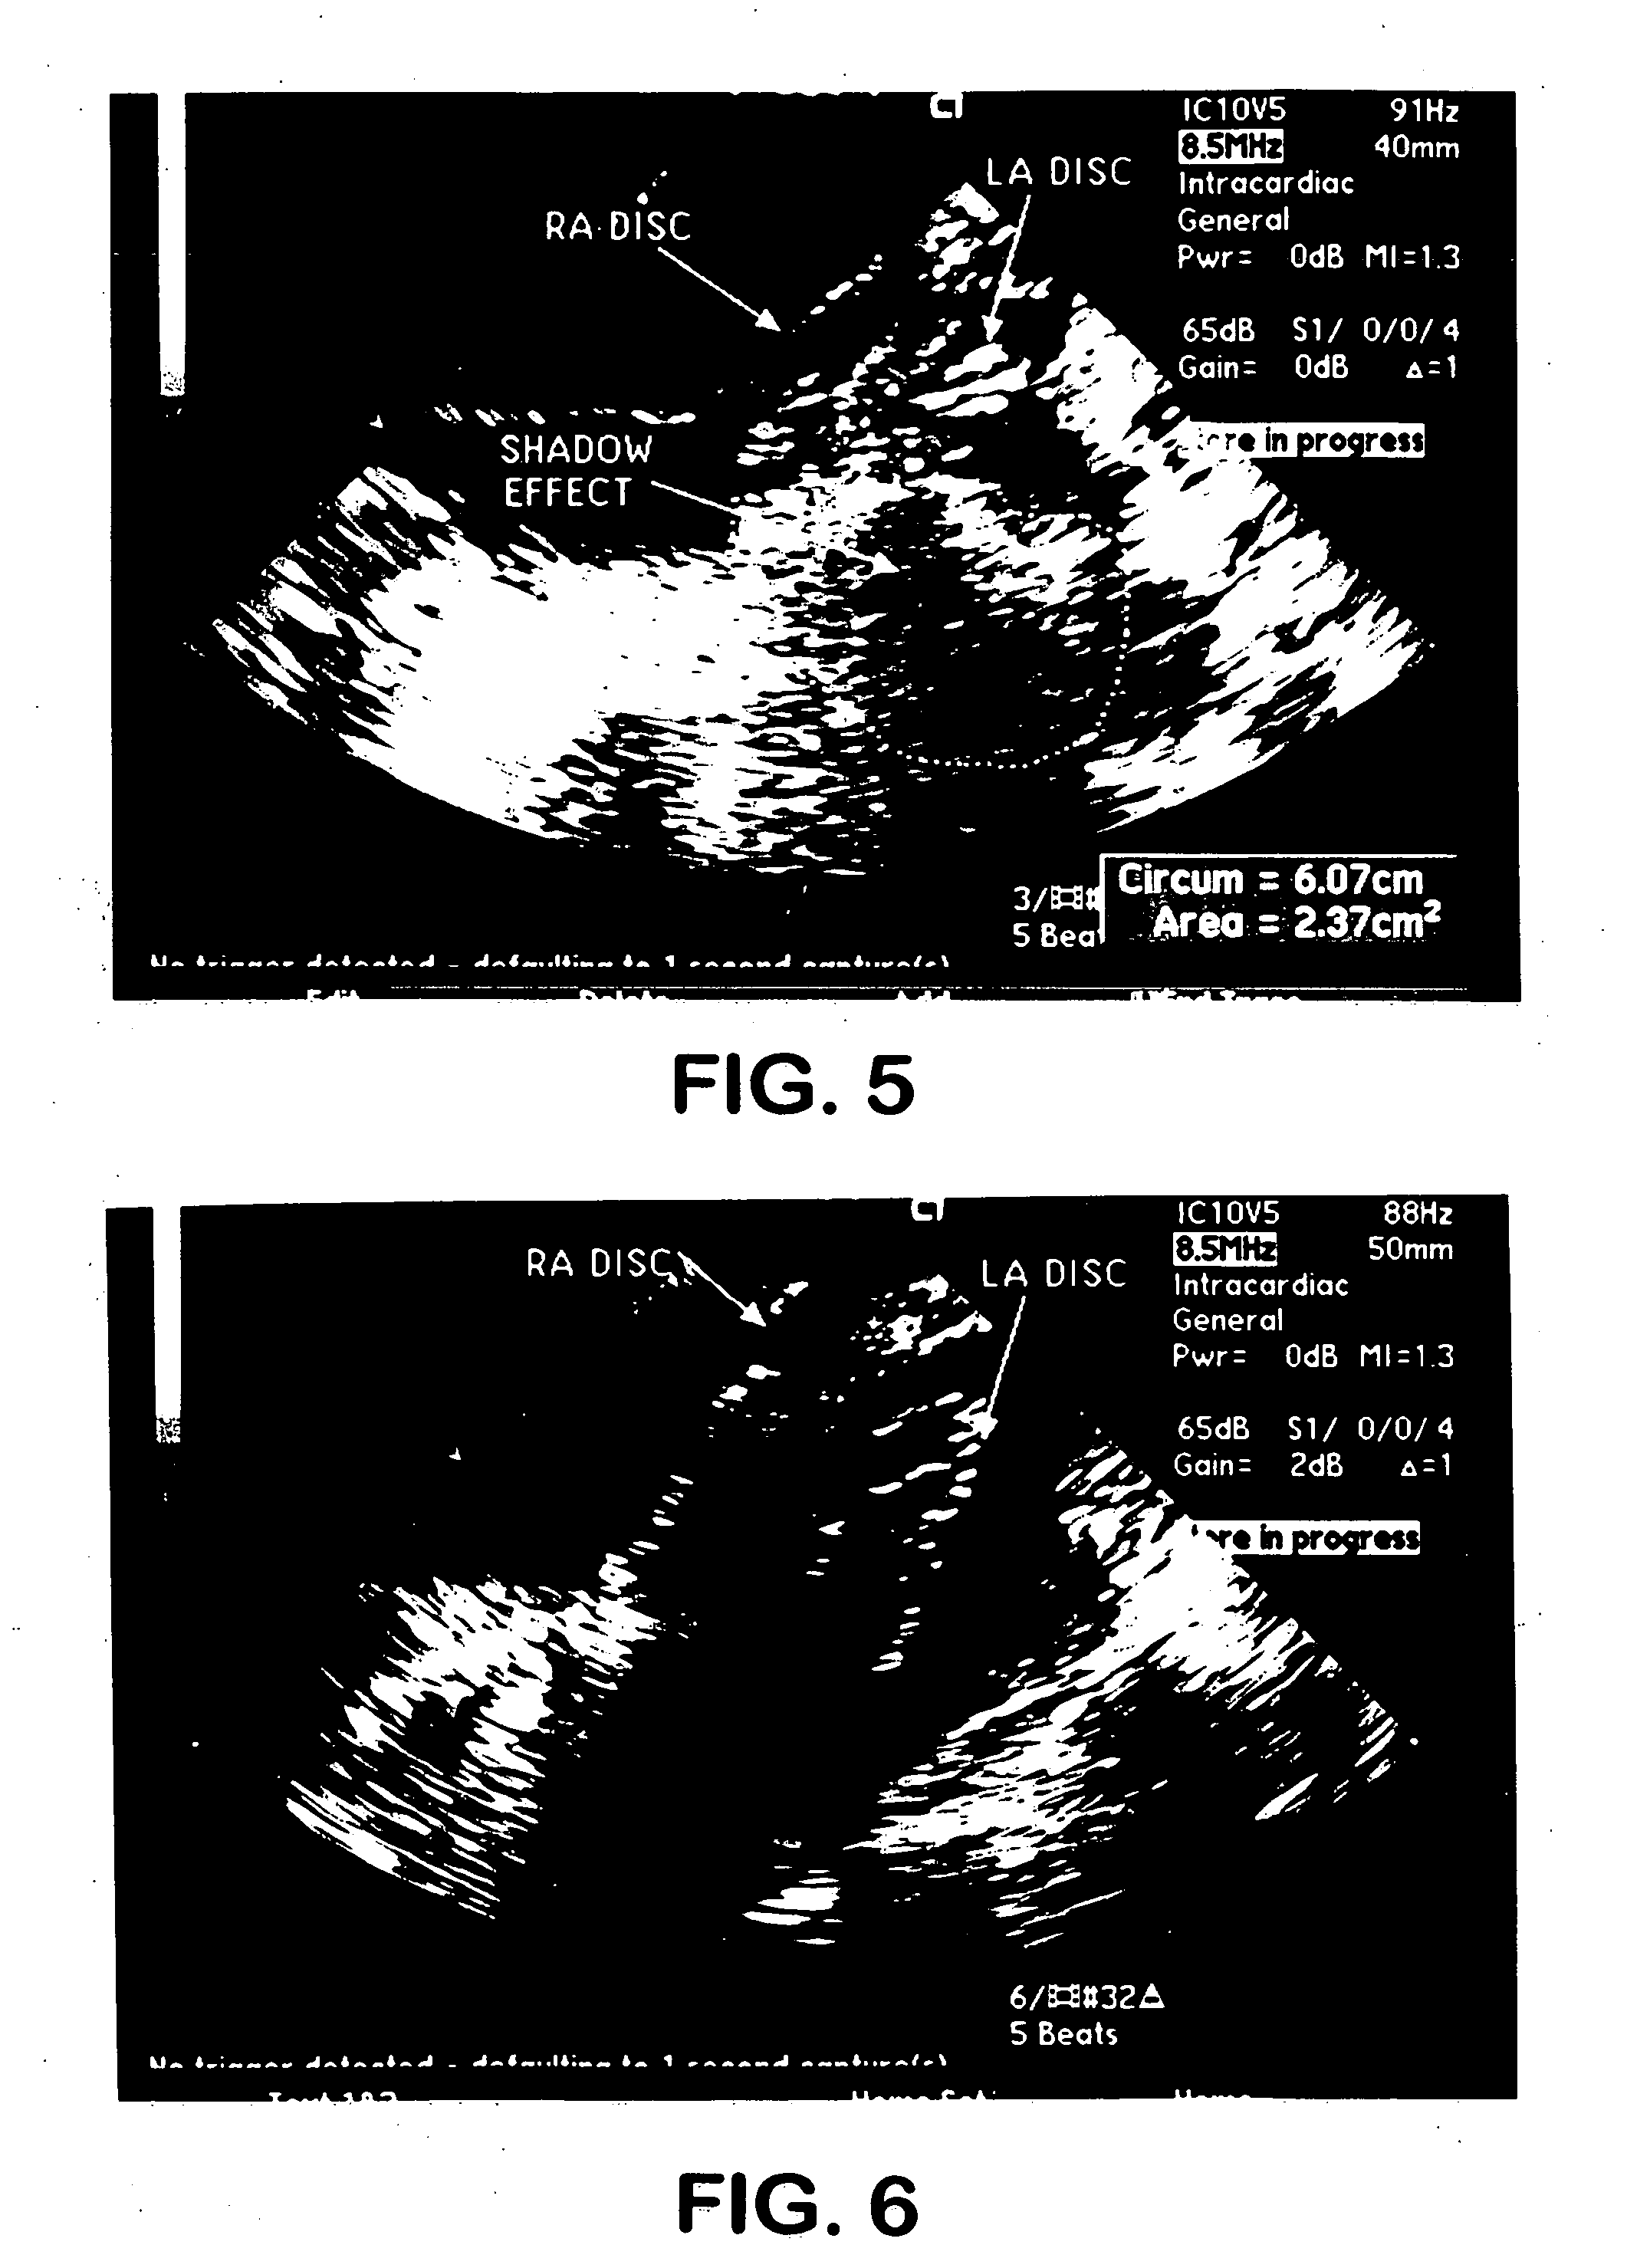 Implantable product with improved aqueous interface characteristics and method for making and using same